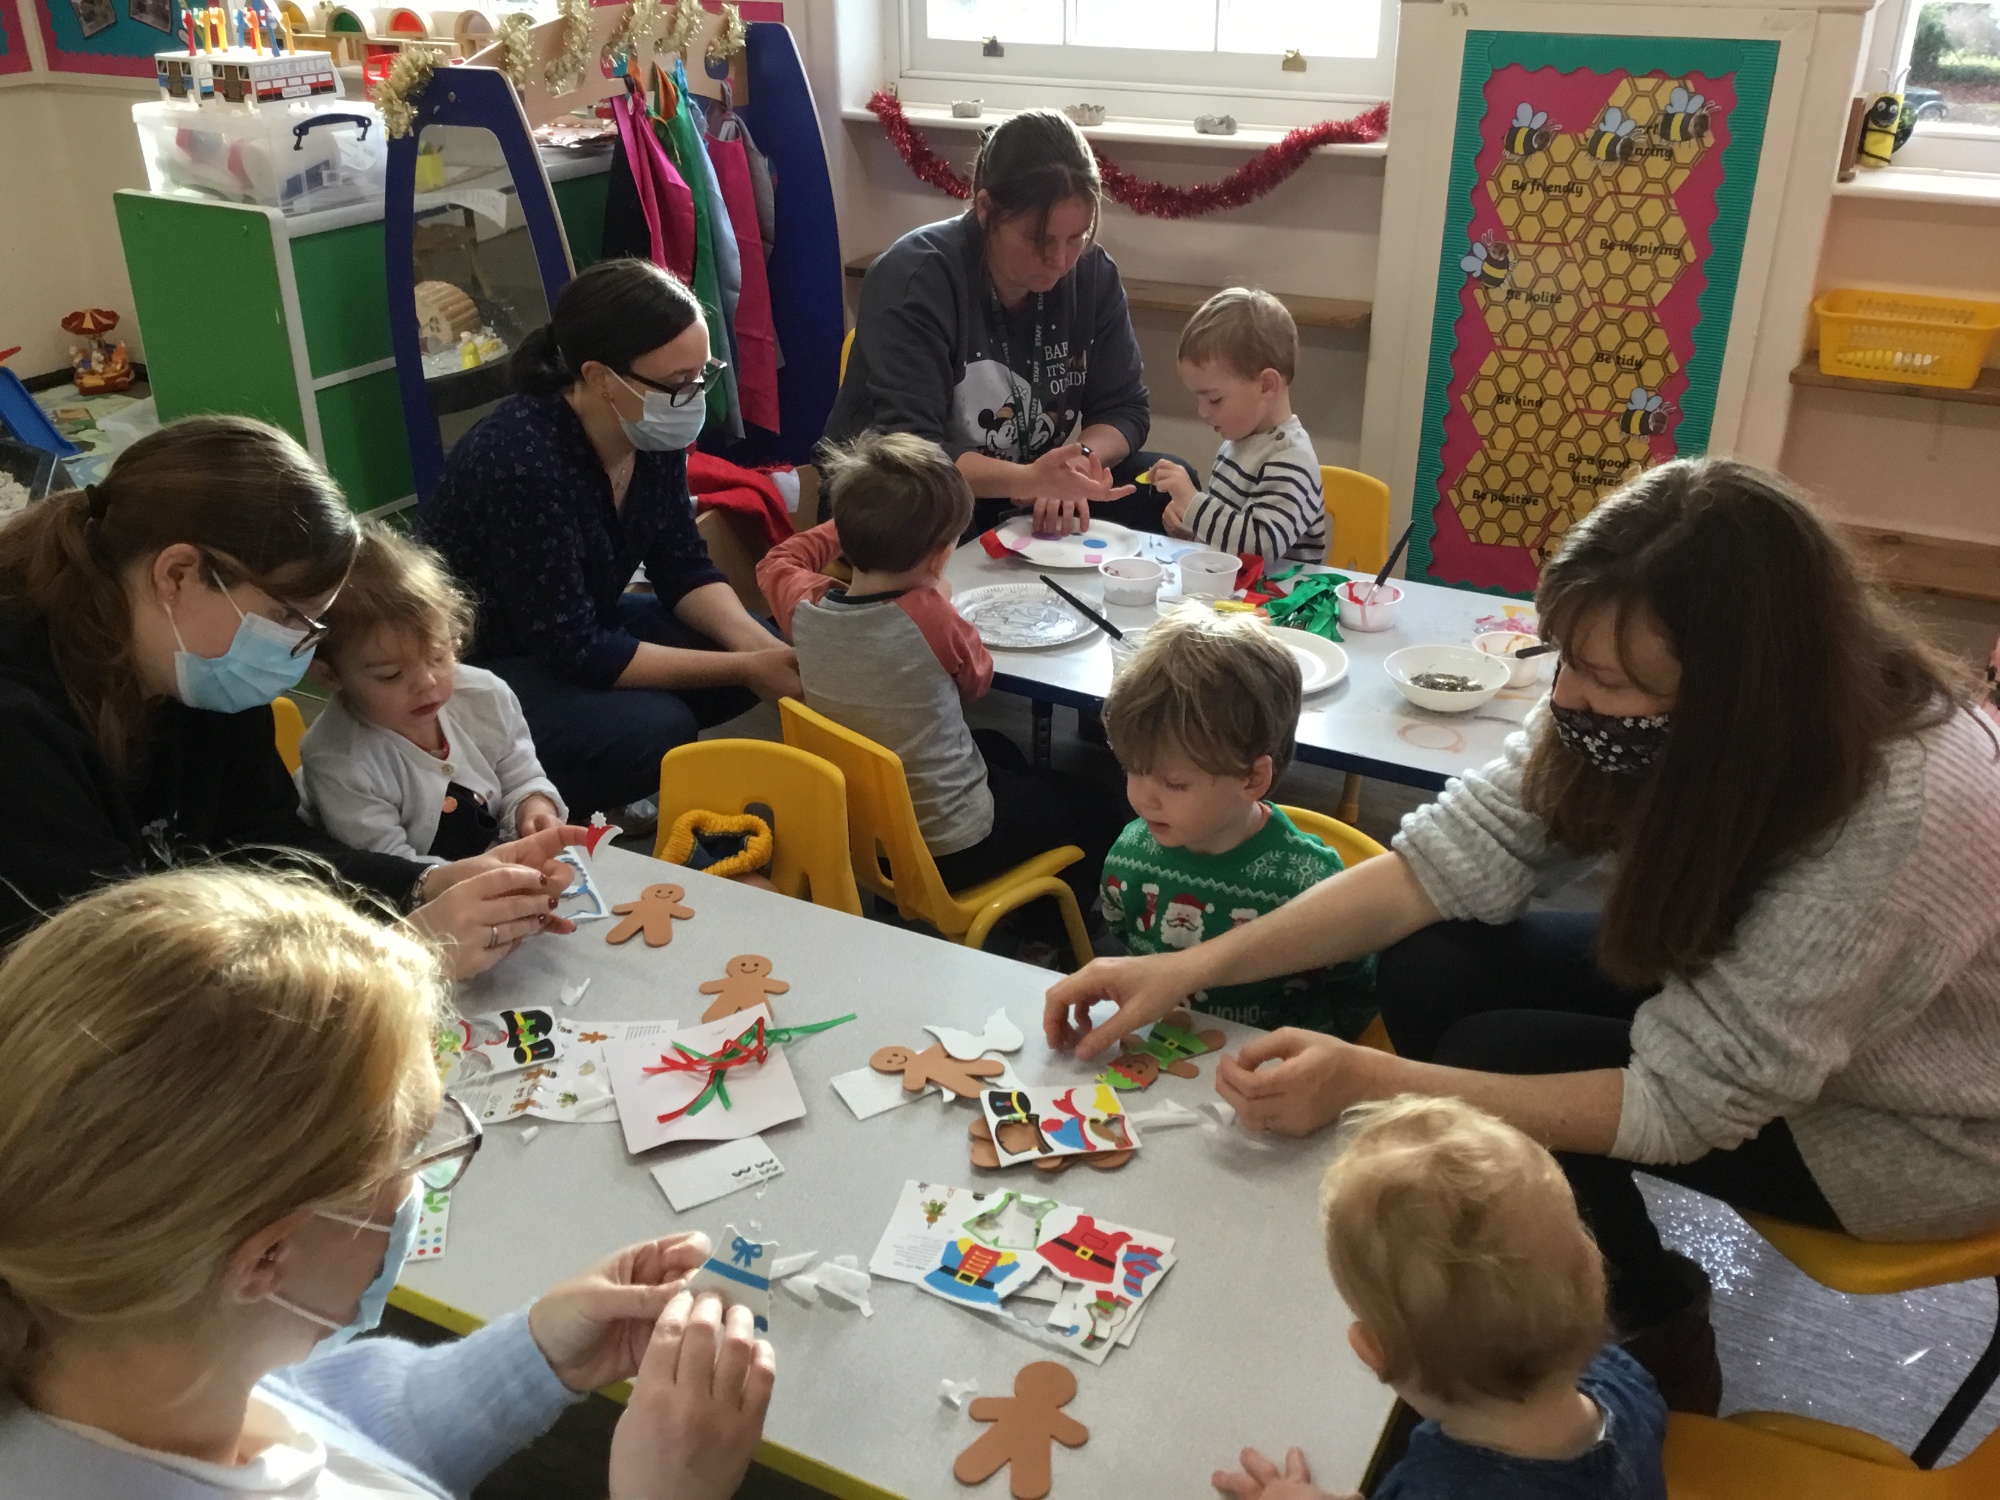 A group of children and parents taking part in craft activities